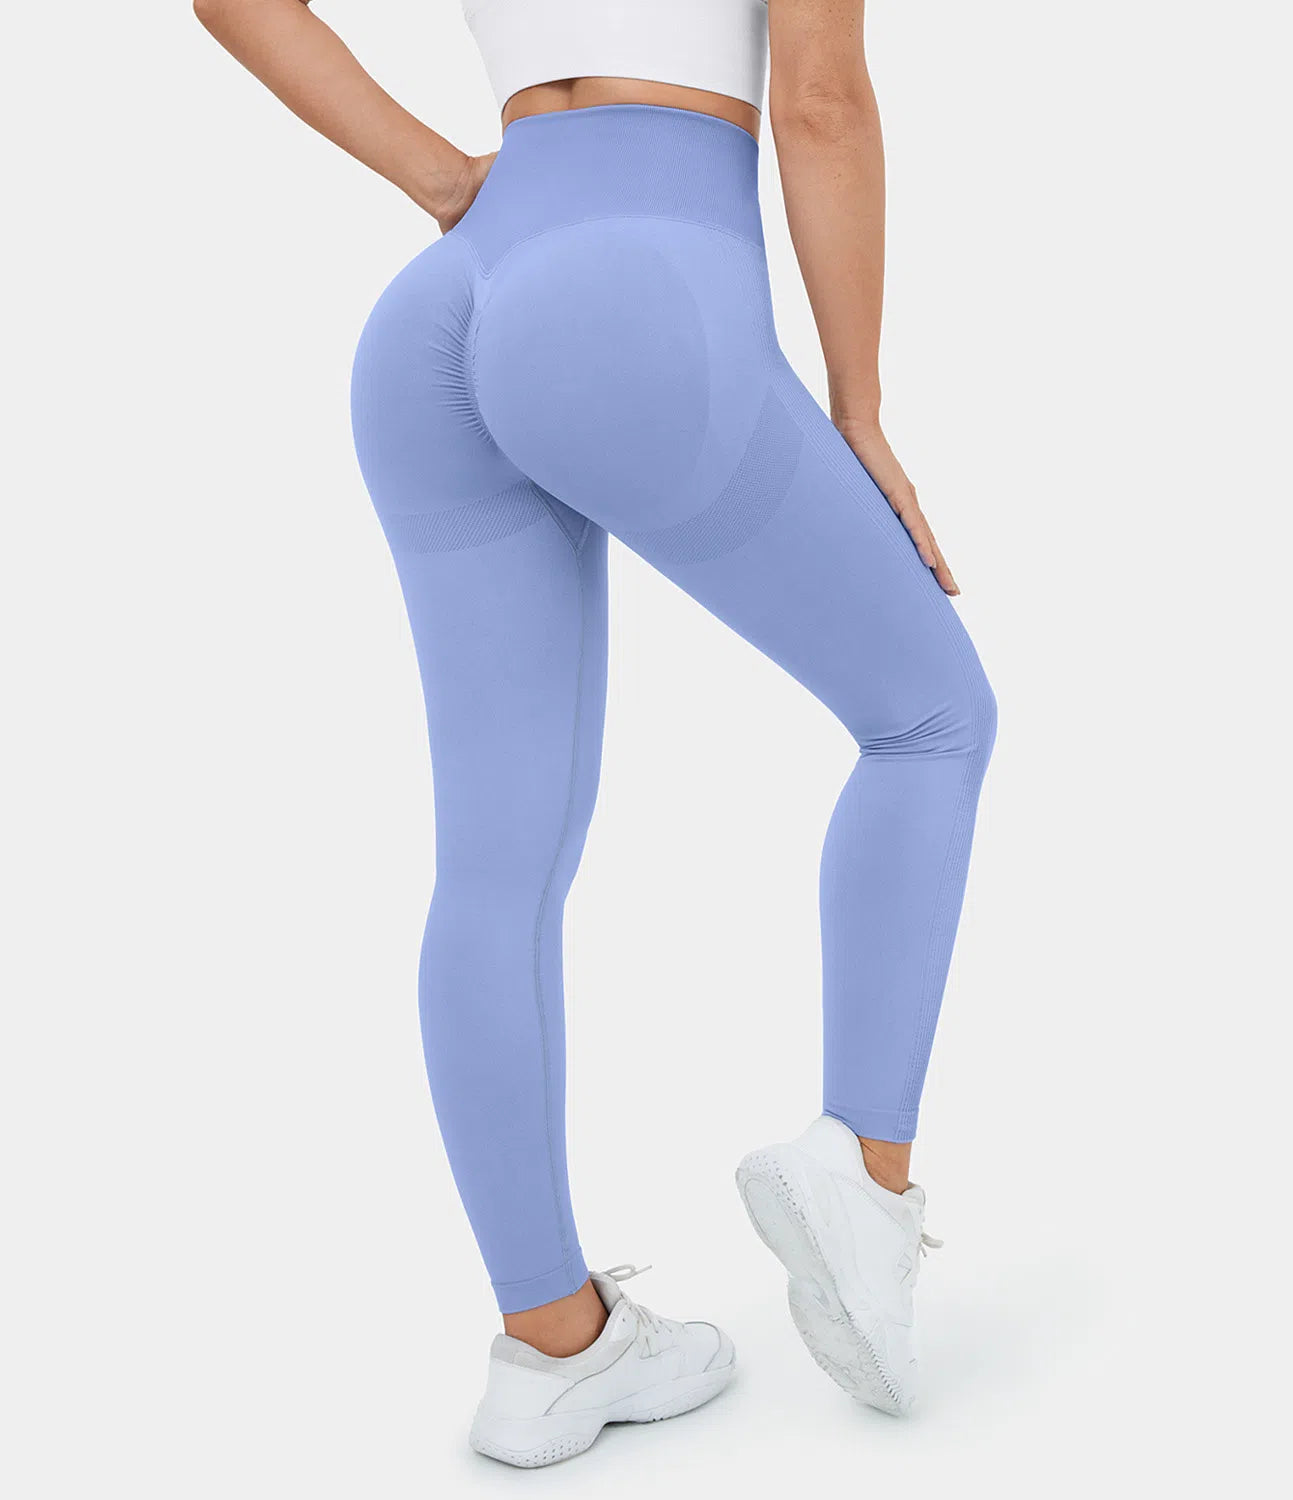 Booty scrunch legging - The best products with free shipping